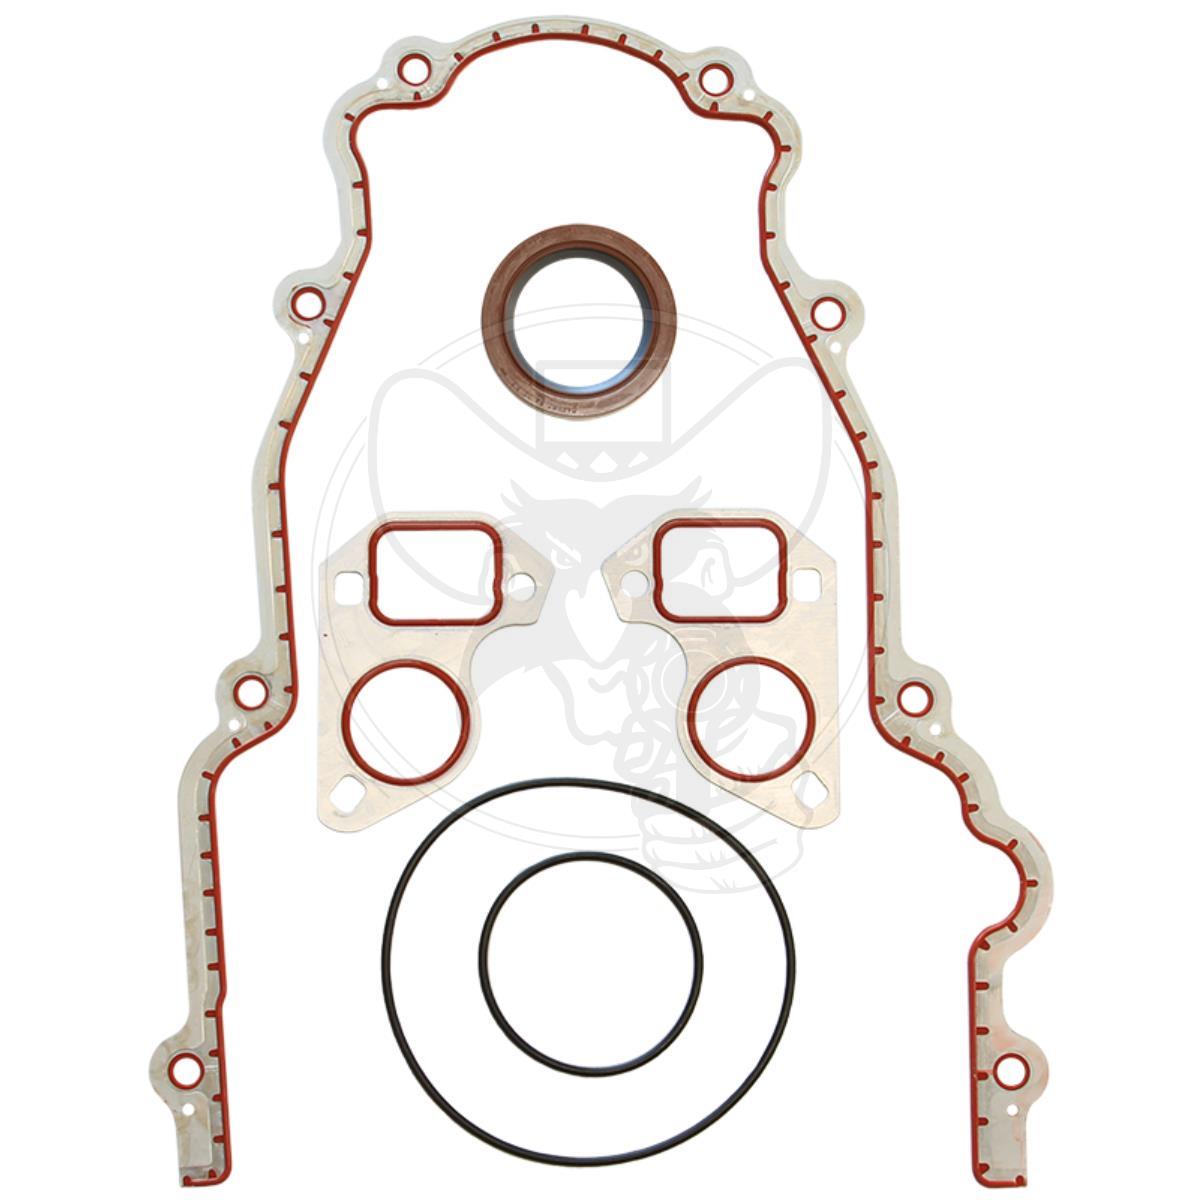 5R RACING TIMING COVER GASKET SET FITS CHEV COMMODORE LS SERIES